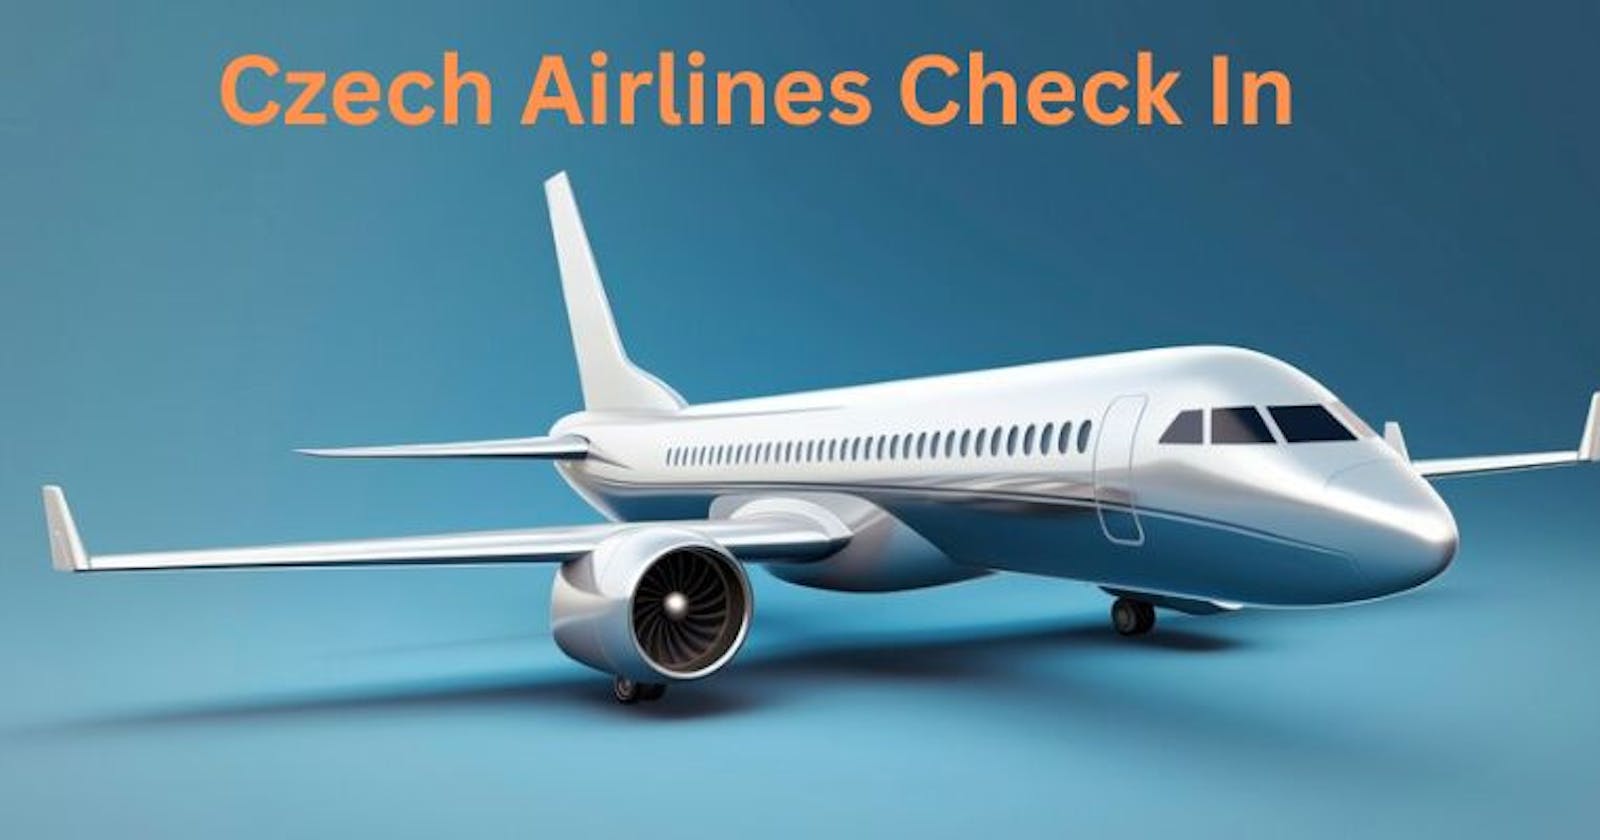 What are the Methods of Czech Airlines Check In?